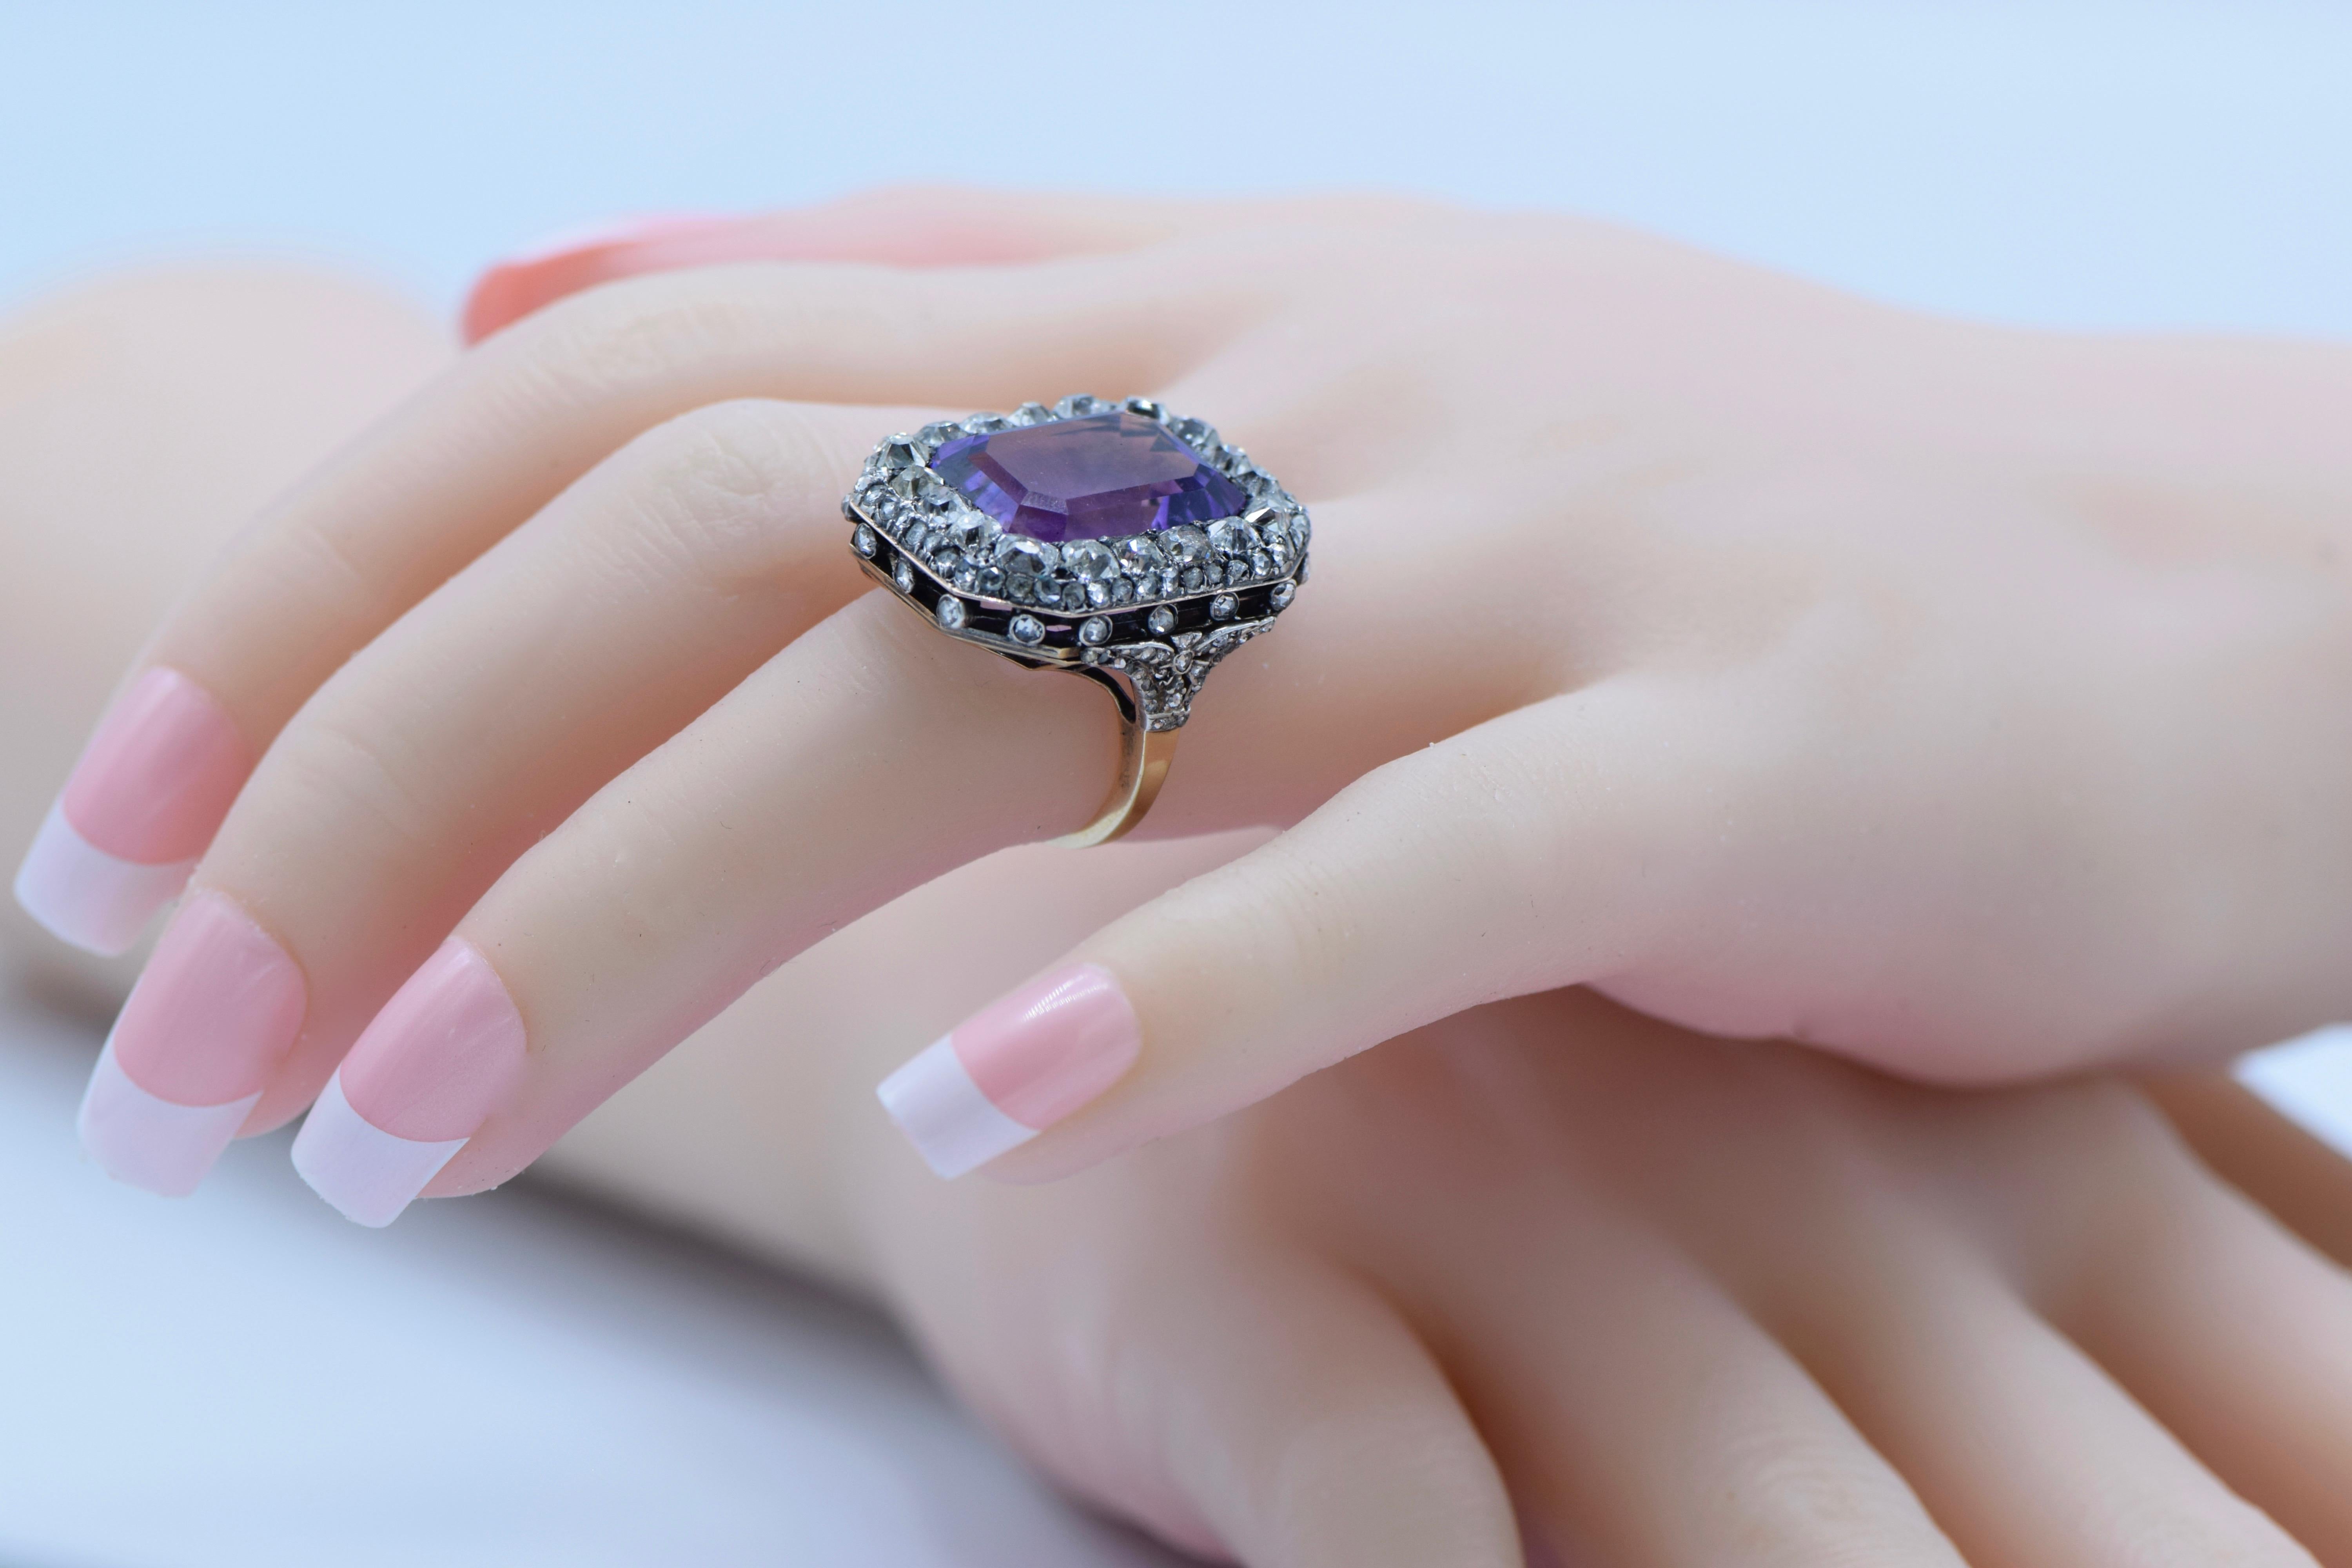 Women's Very Beautiful Antique Diamond, Amethyst, Gold and Silver Ring